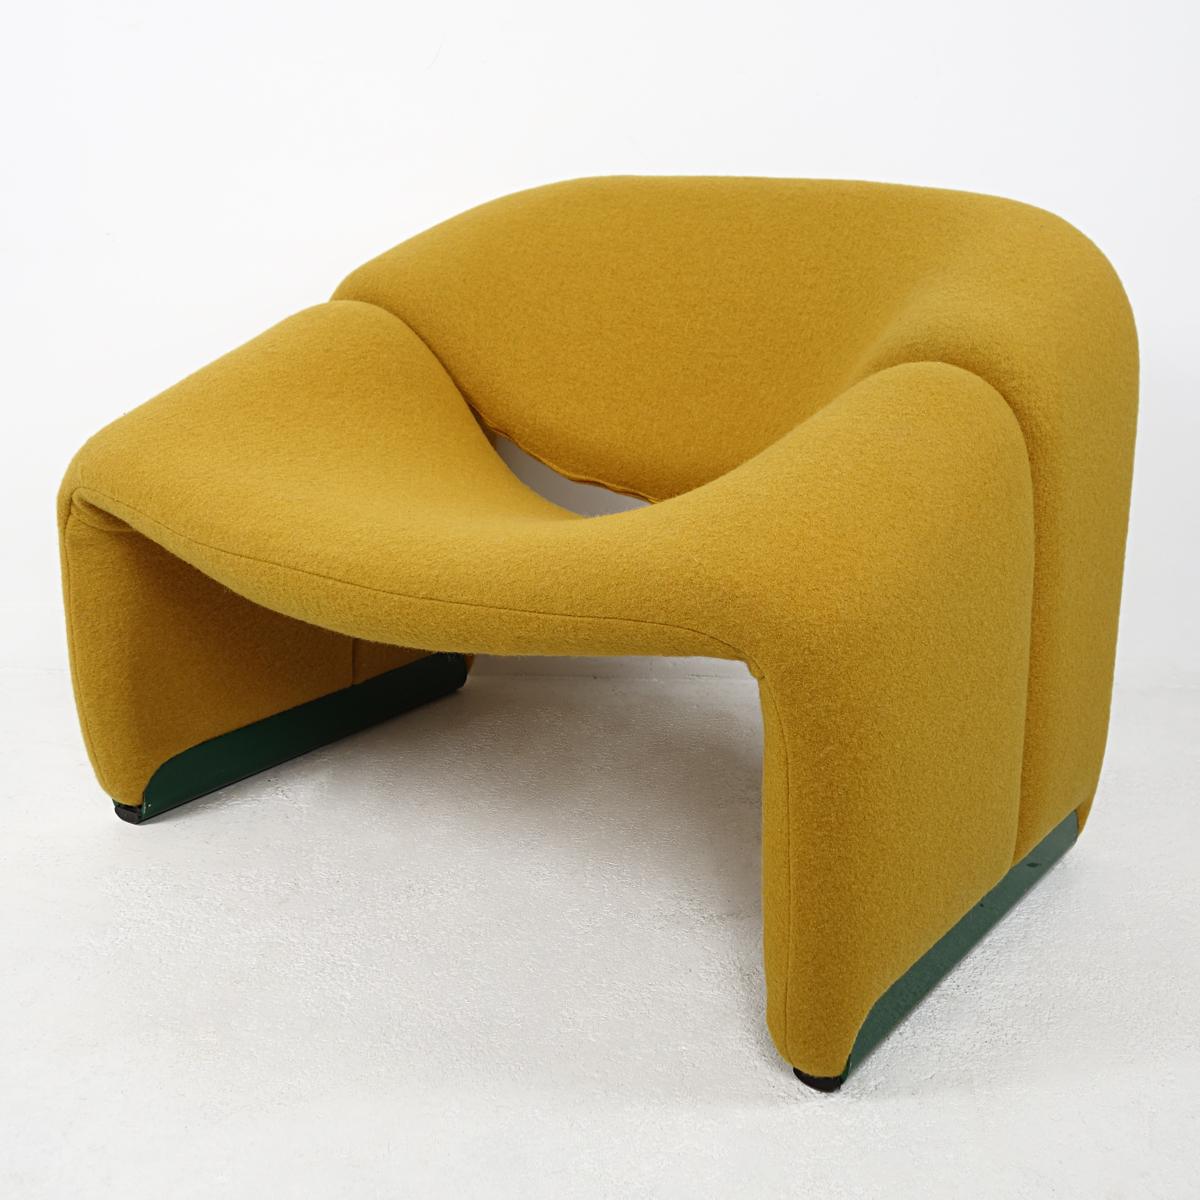 The Groovy chair, or F598, was designed in 1973 by France’s top designer Pierre Paulin for Holland’s most Avant-Garde furniture maker Artifort. The compactness of the chair combined with great comfort and of course its iconic looks made this chair